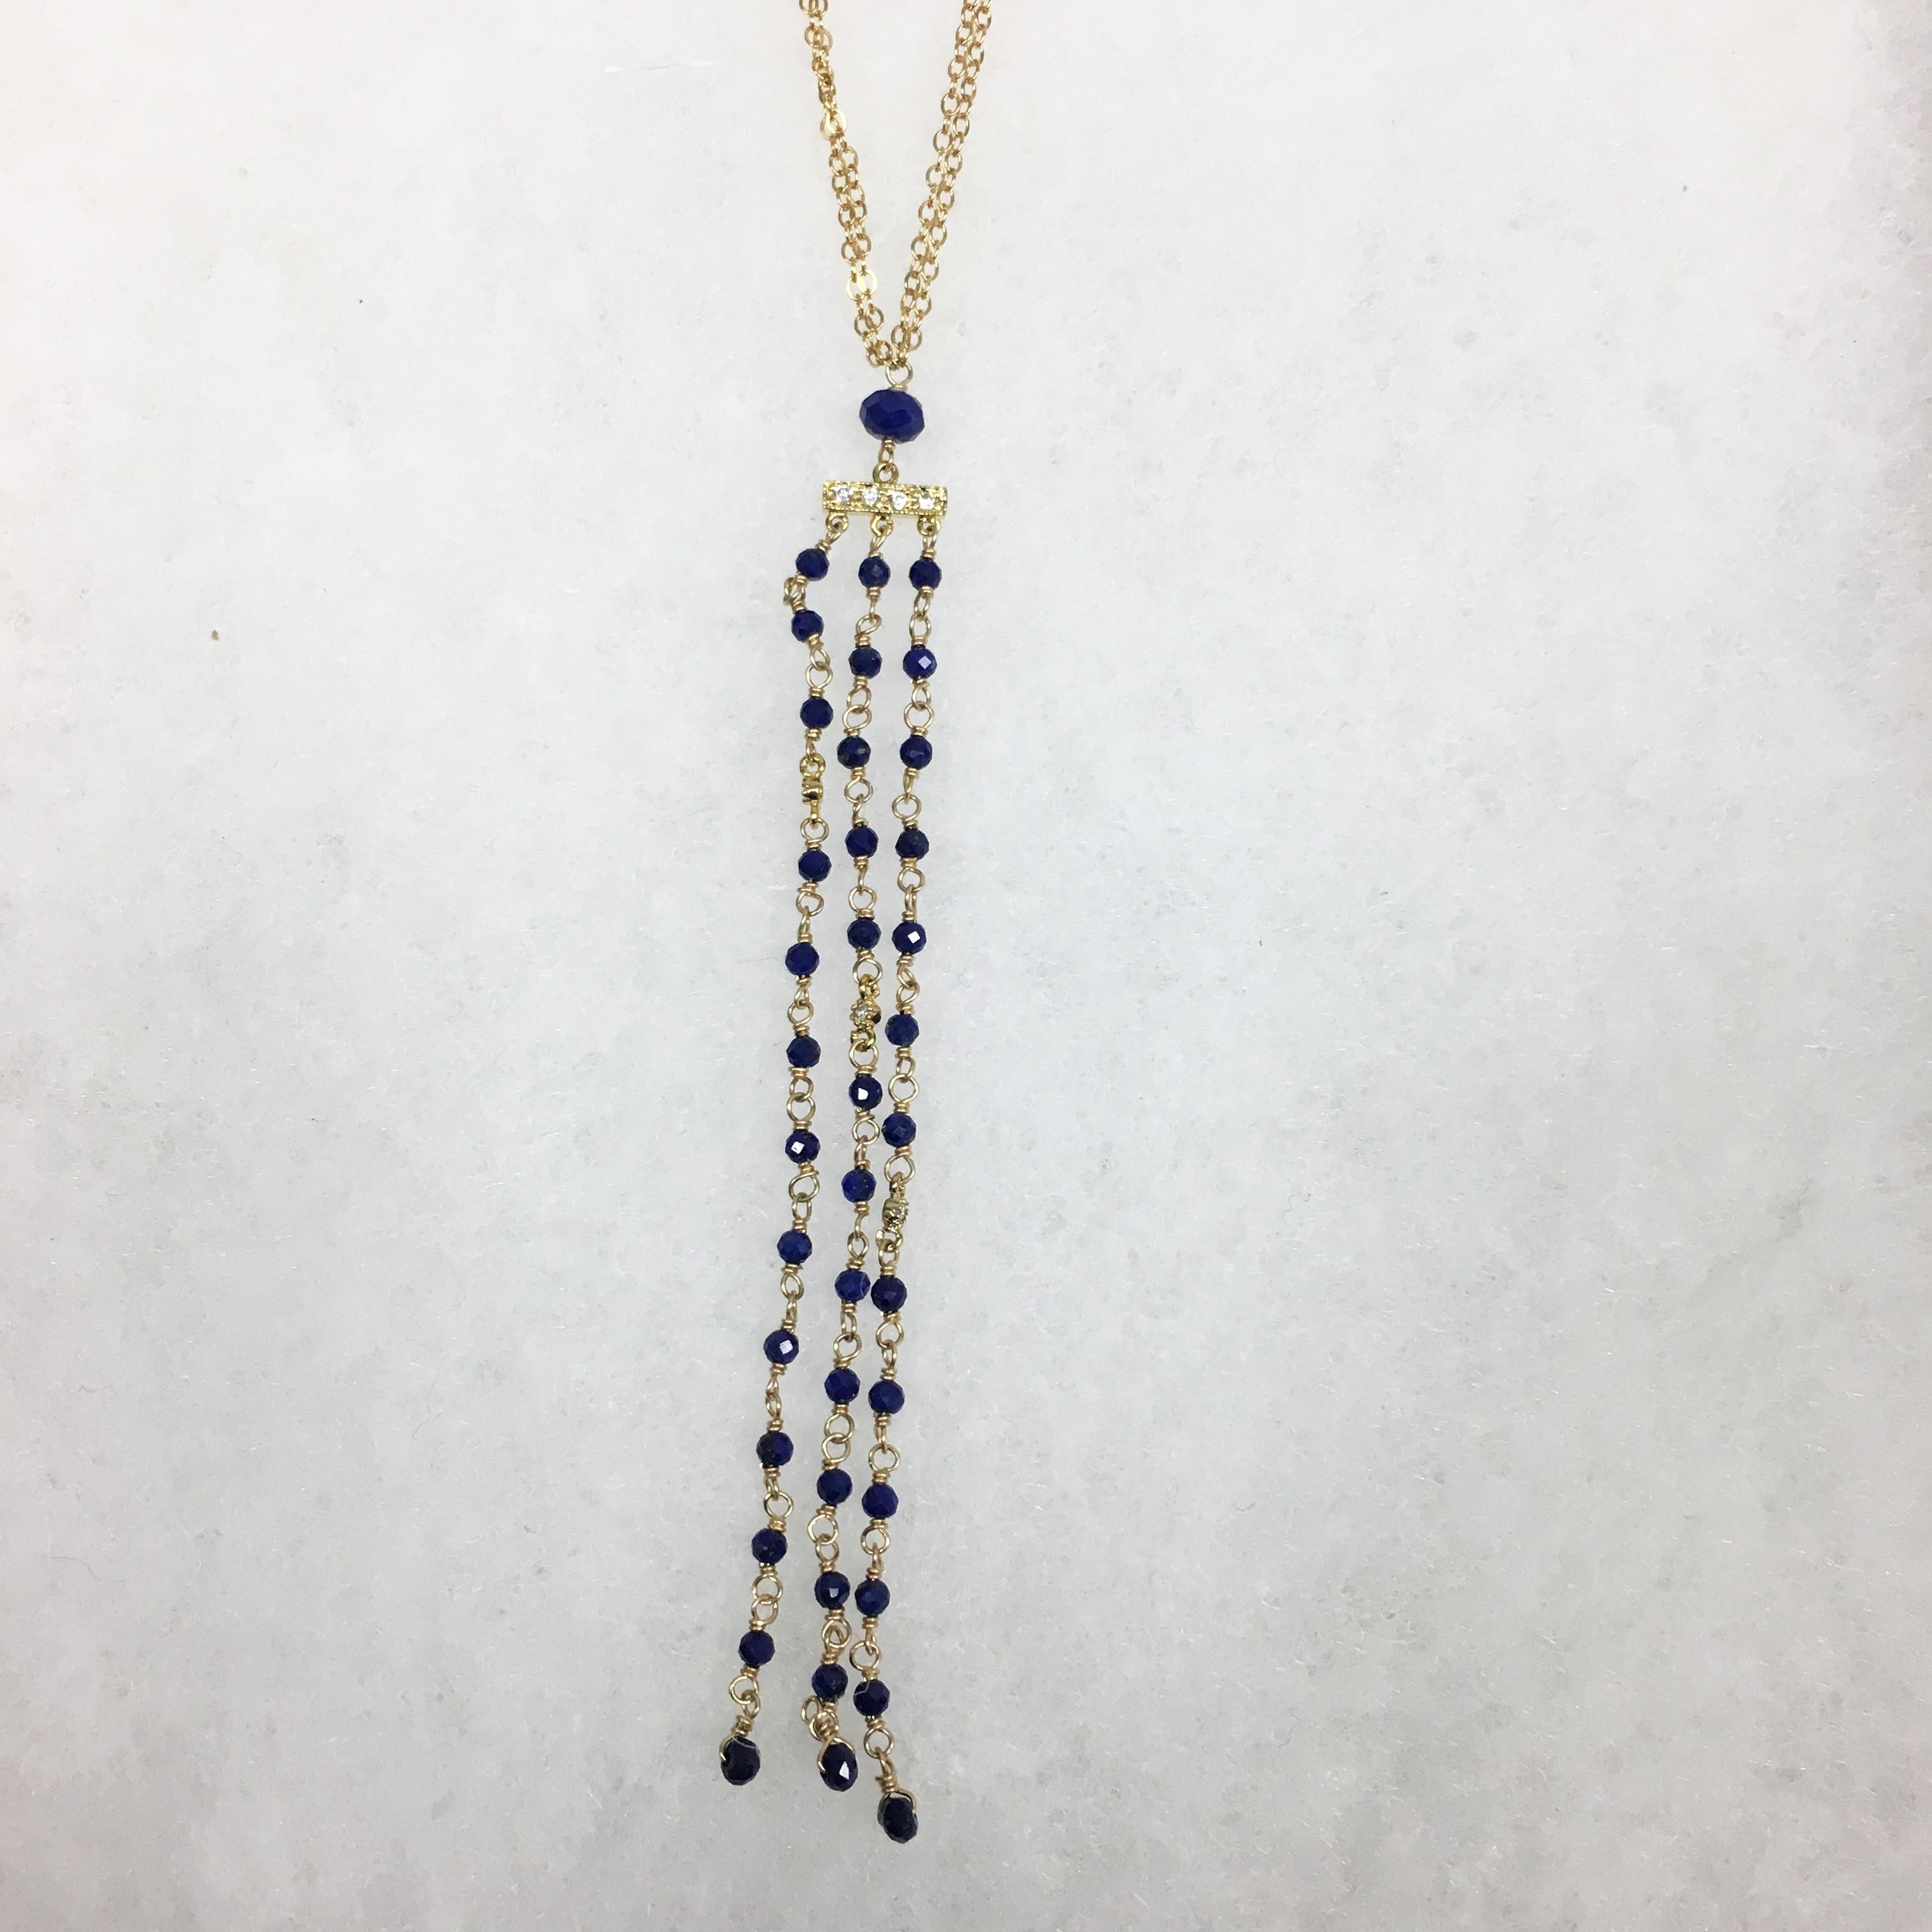 Lapis Hand Beaded Tassel Necklace with CZ - Art by Emily Elaine